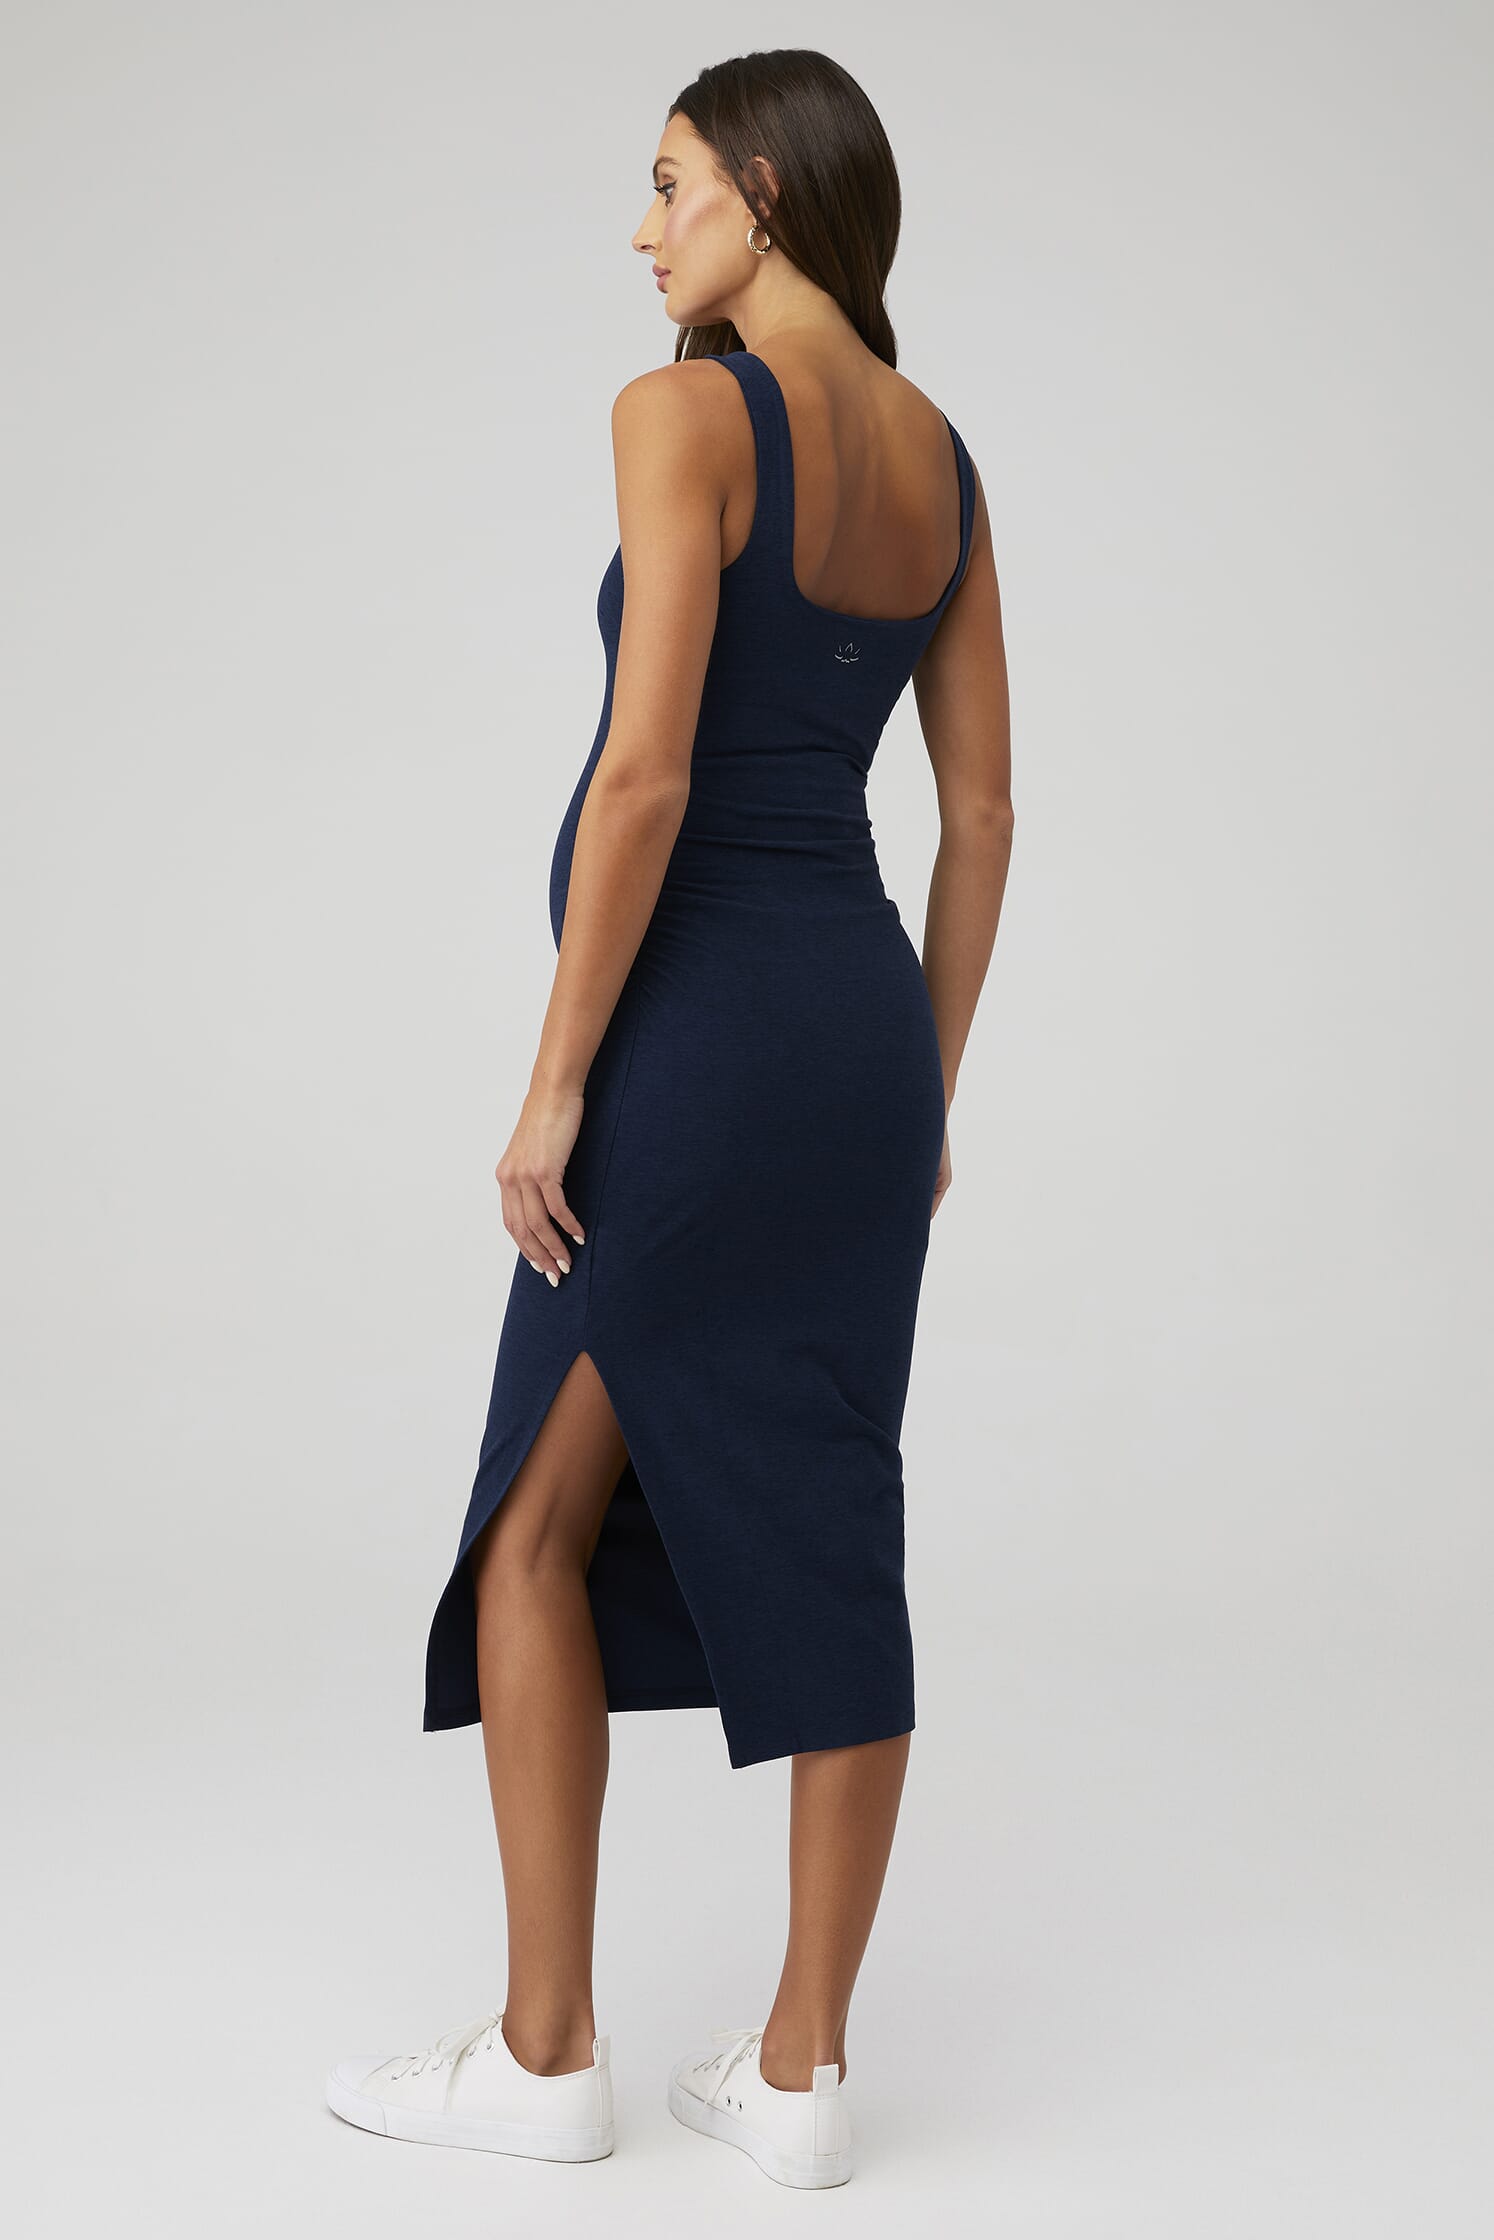 https://images.fashionpass.com/products/spacedye-icon-maternity-dress-beyond-yoga-nocturnal-navy-62a-3.jpg?profile=a